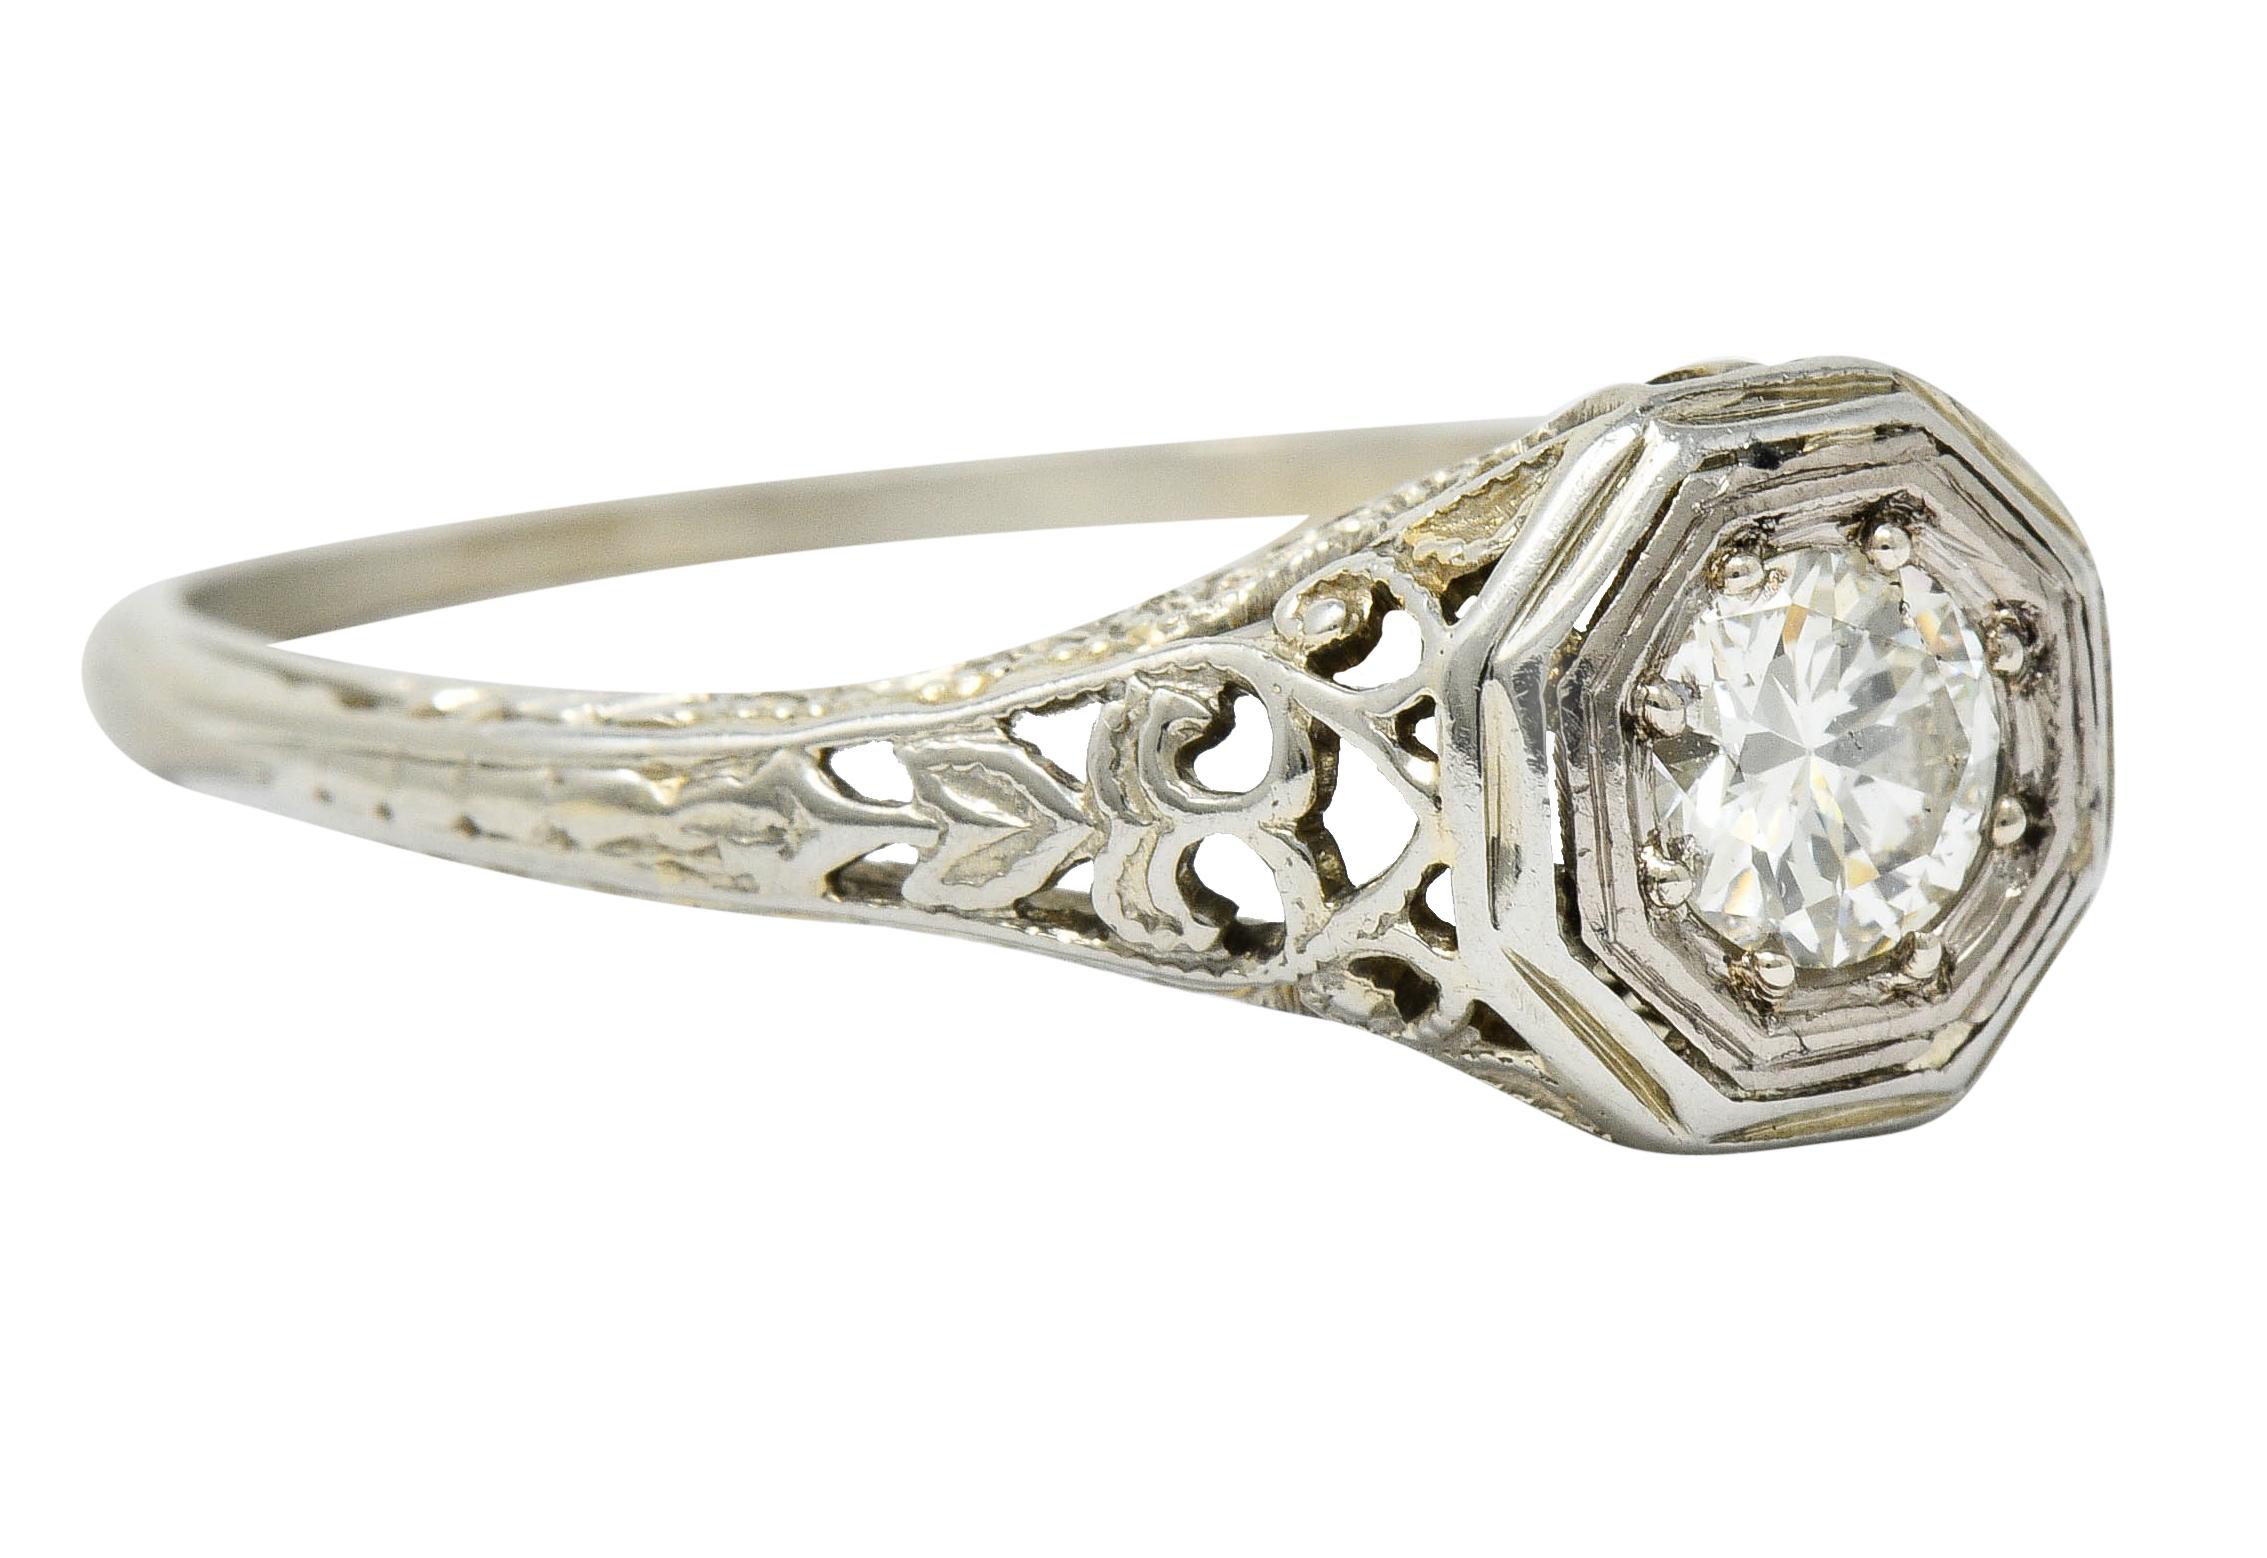 Centering a transitional cut diamond weighing approximately 0.25 carat; K color with SI clarity

Set low in an octagonal head in a decorous filigree mounting

With engraved details and an arrow motif at shoulders

Maker's mark for W.W. Fulmer & Co.